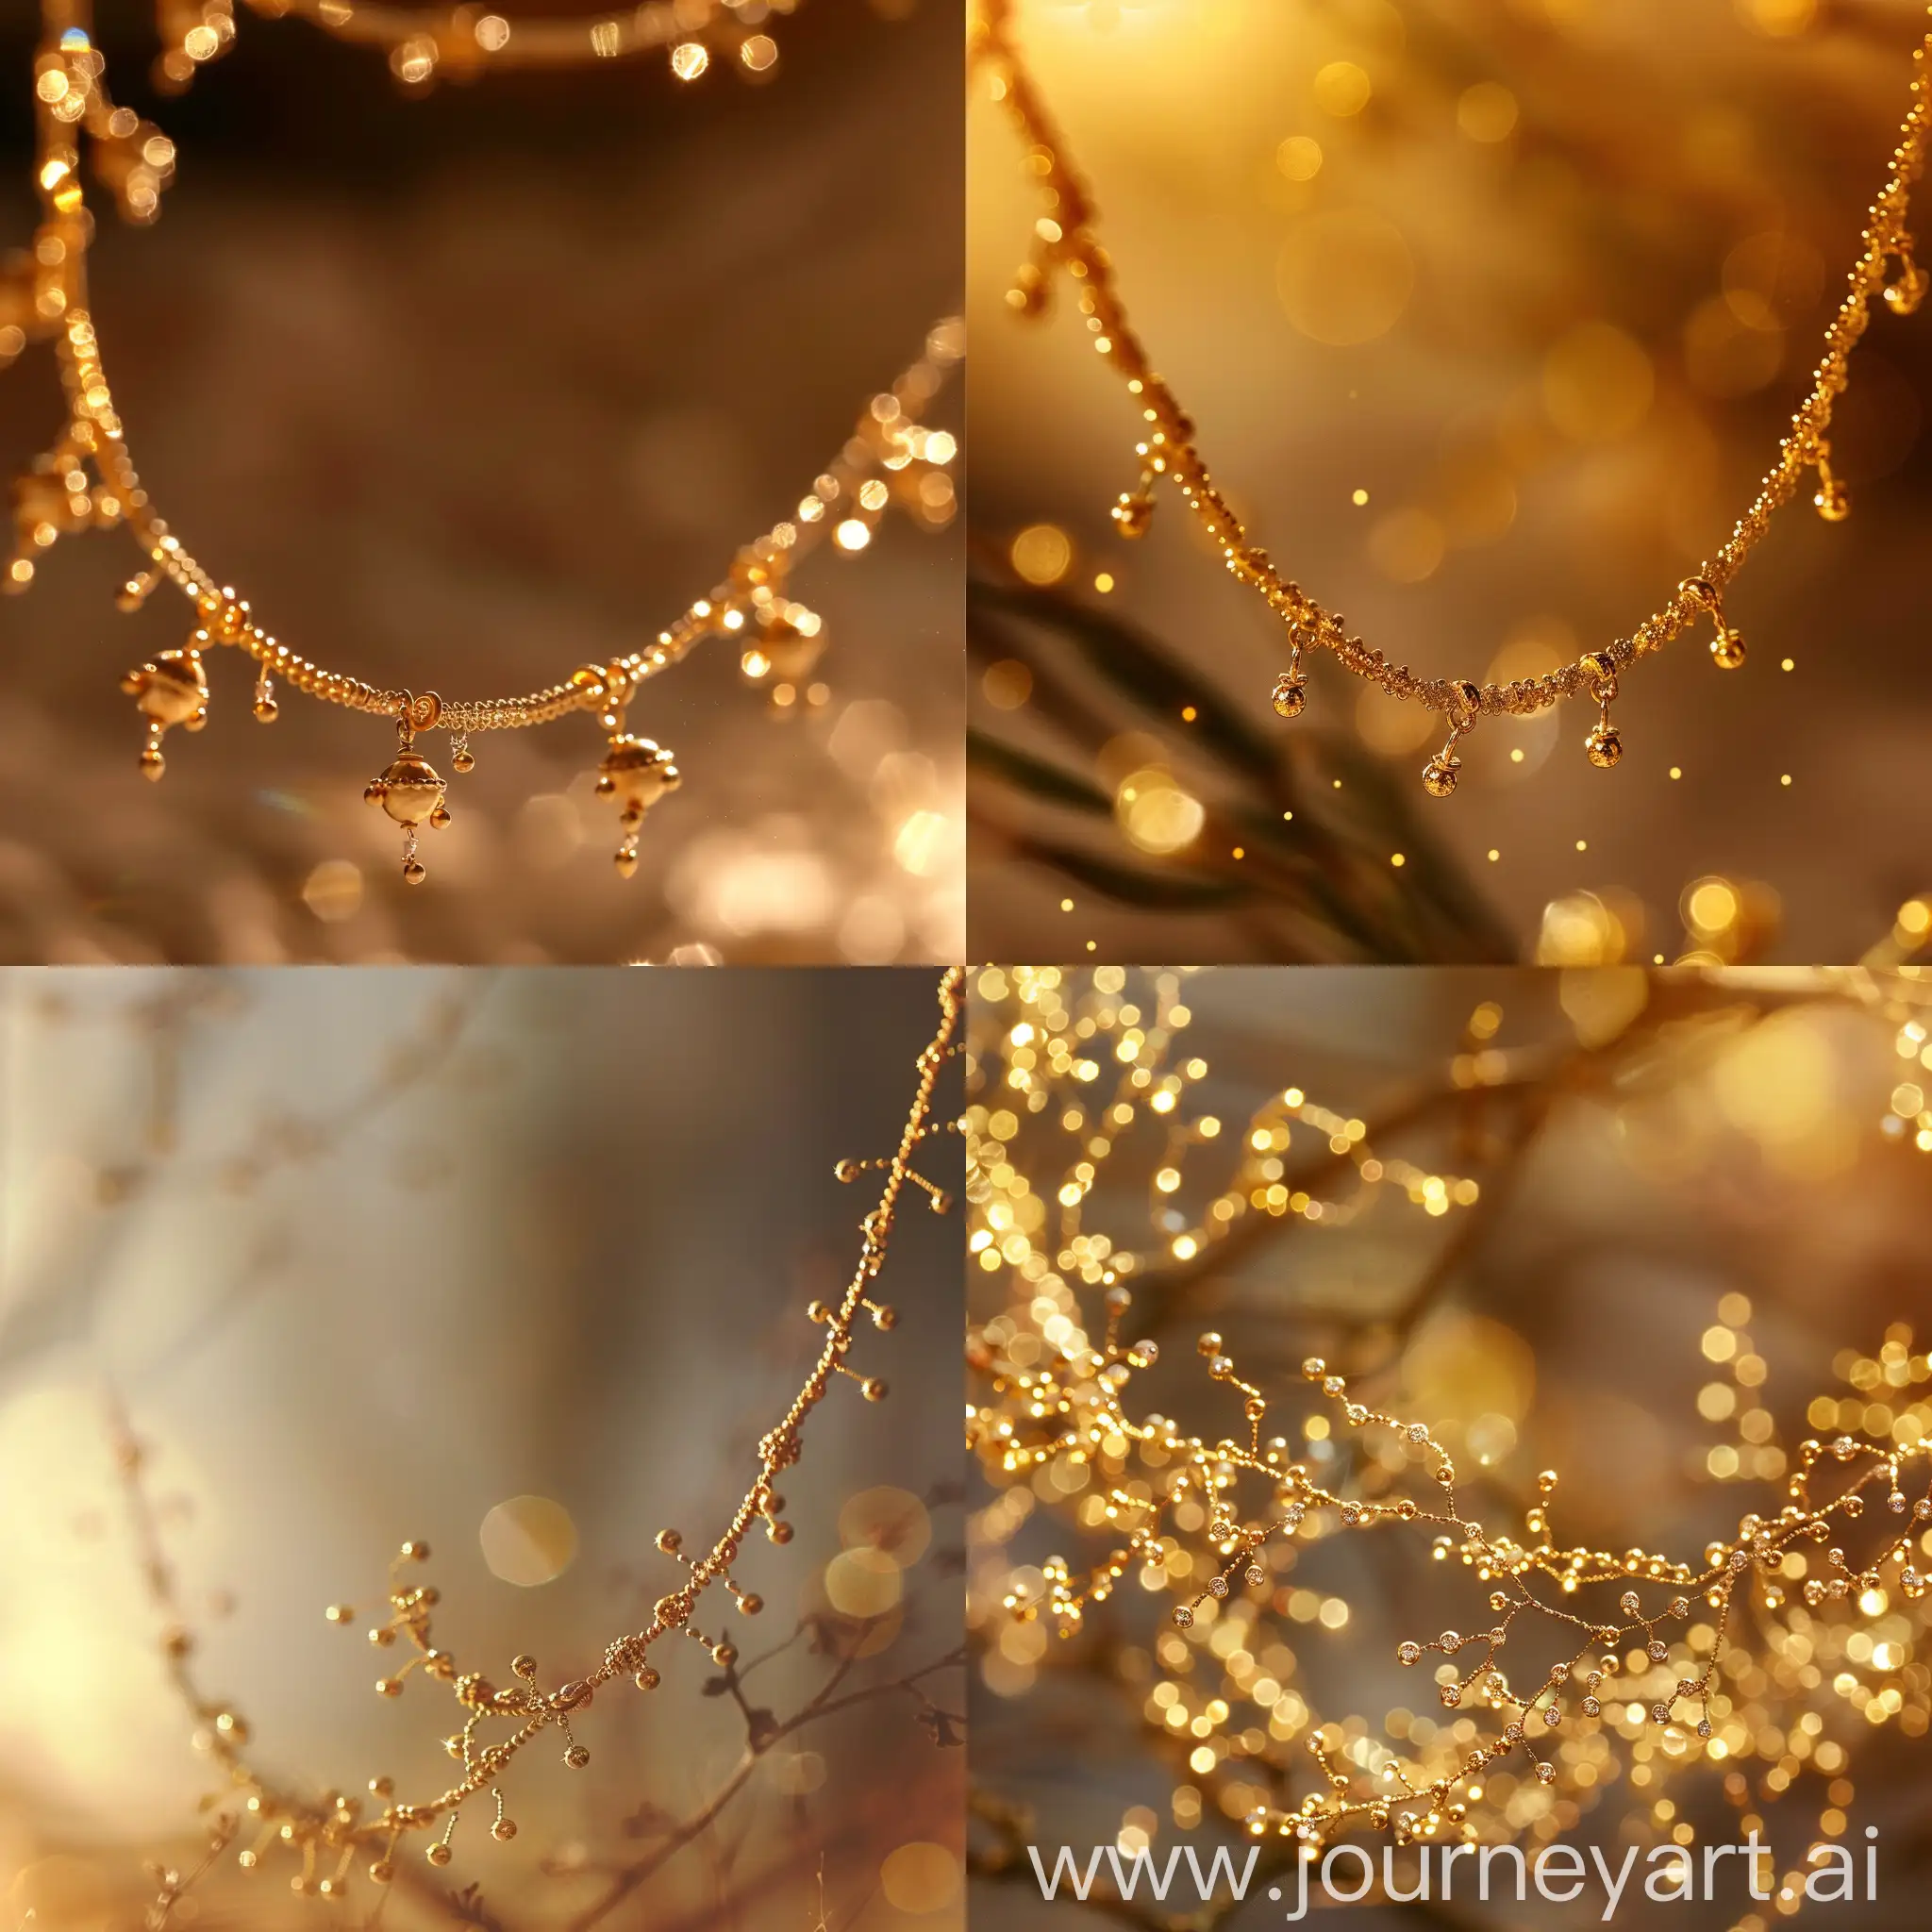 Luxurious-Fine-Gold-Necklace-with-Sparkling-Details-in-Sunlight